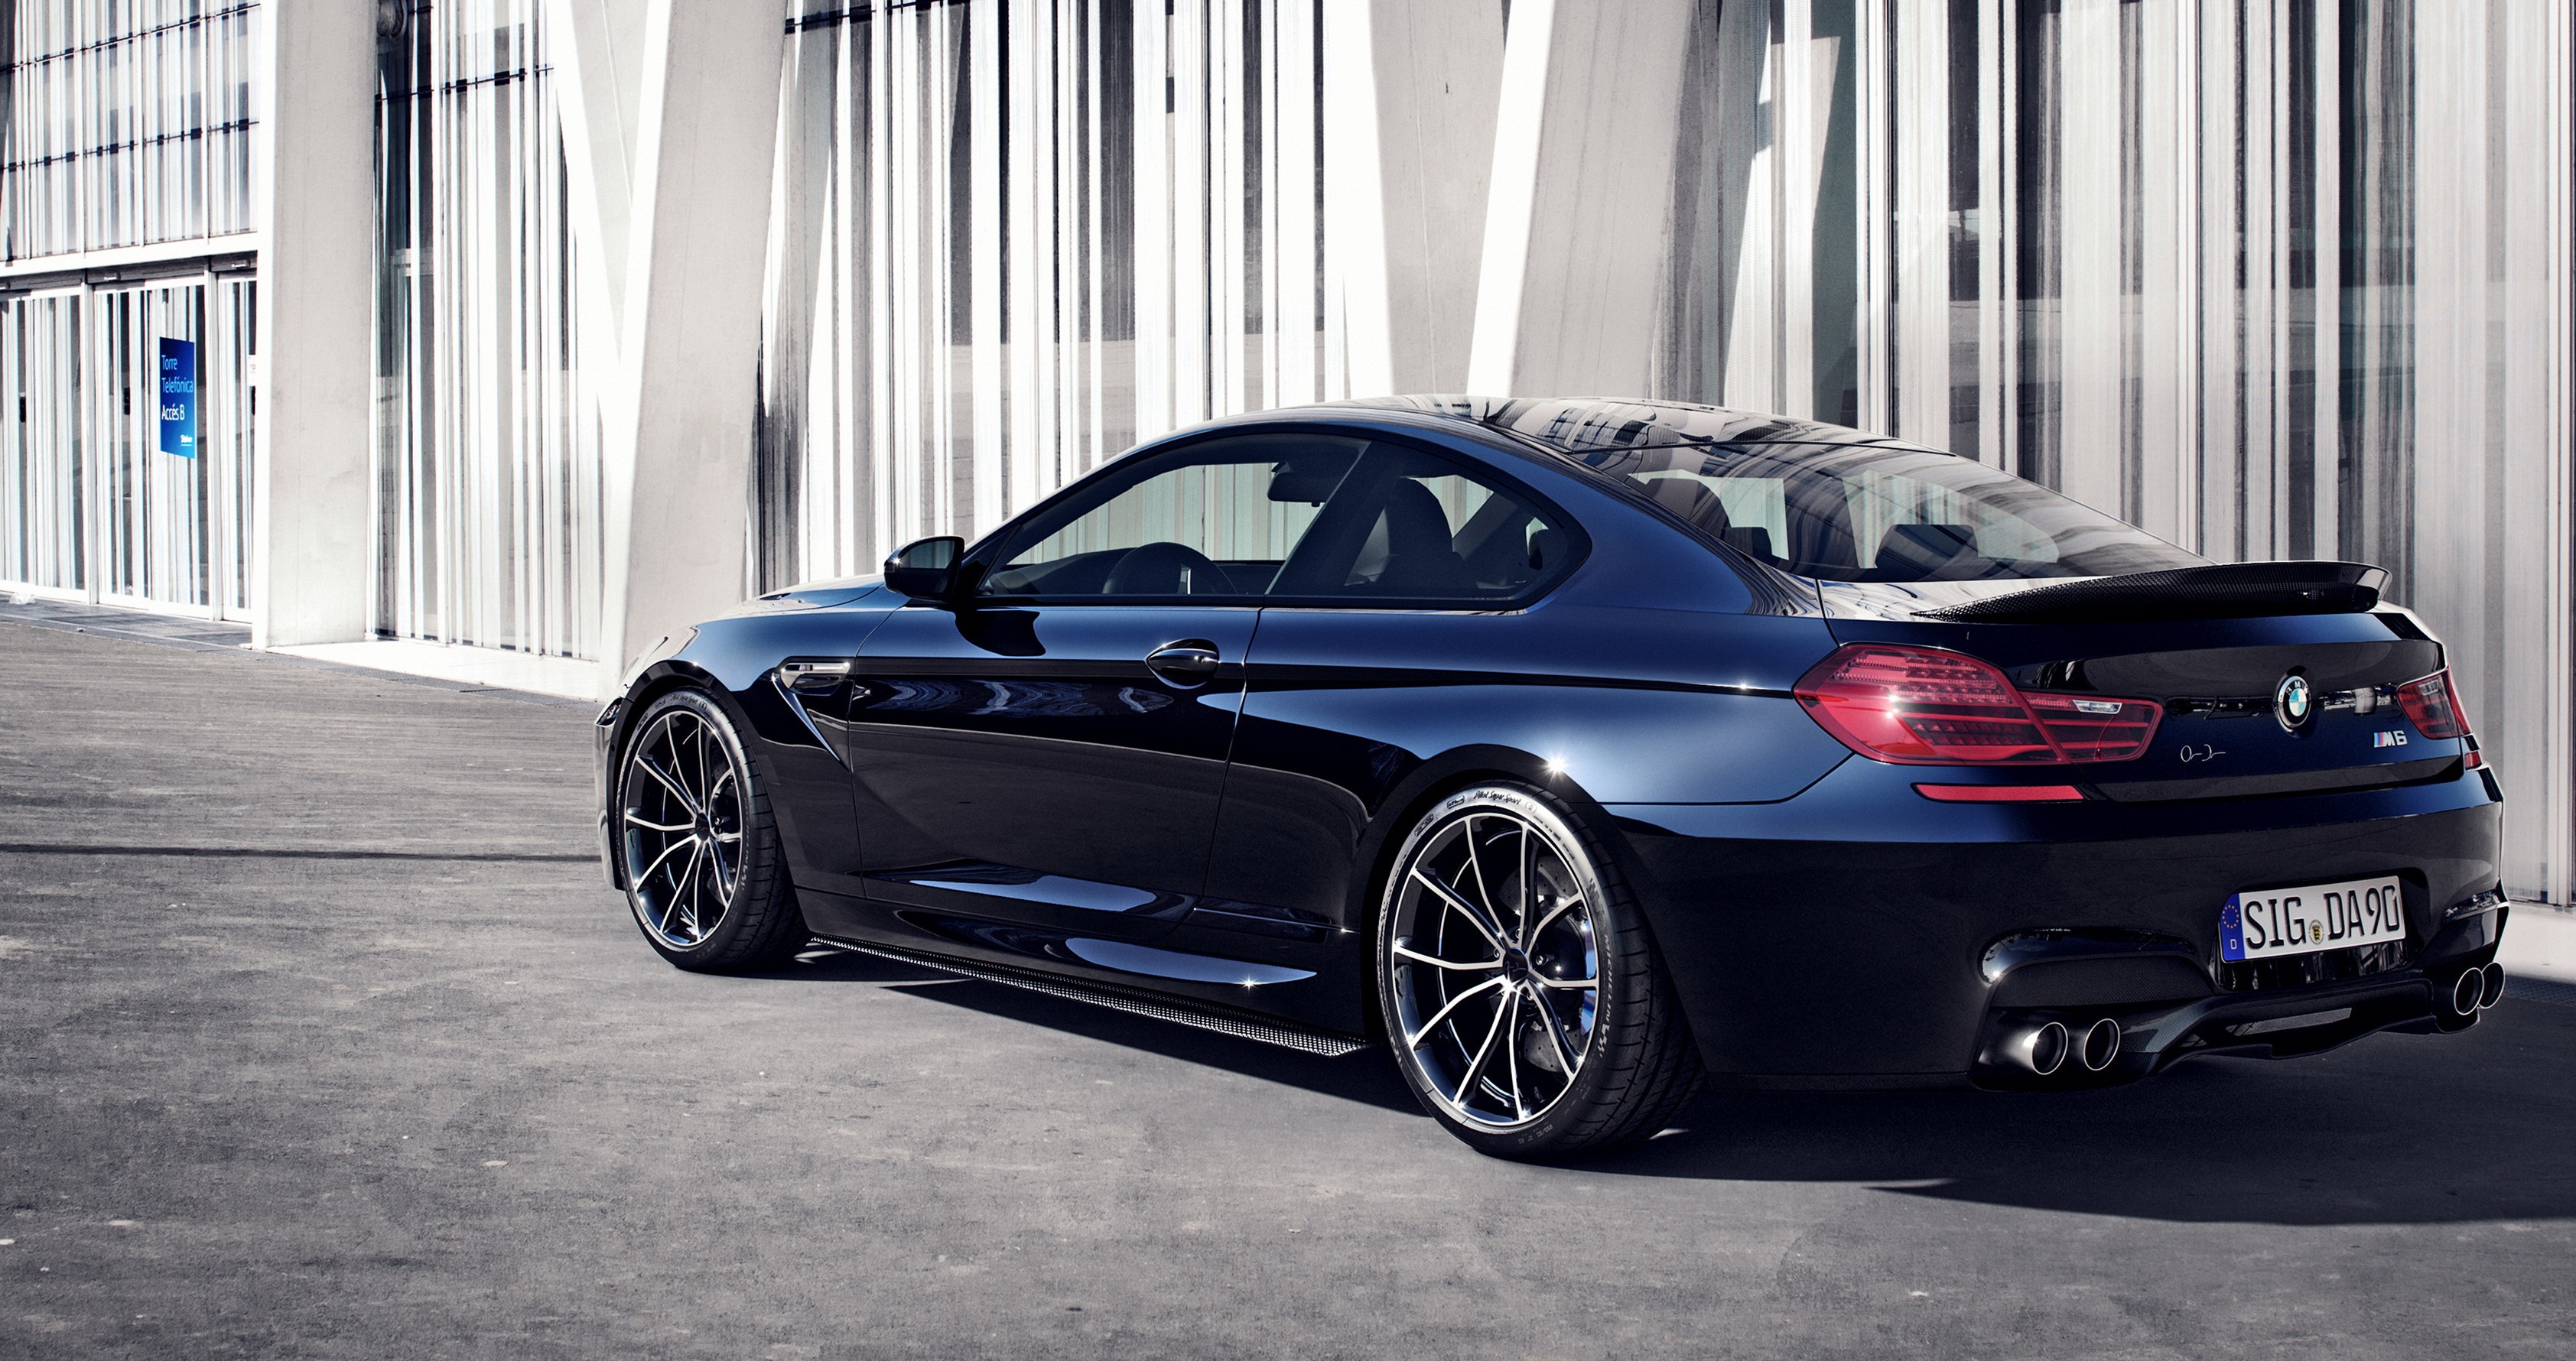 BMW M6 Wallpapers, Pictures, Images